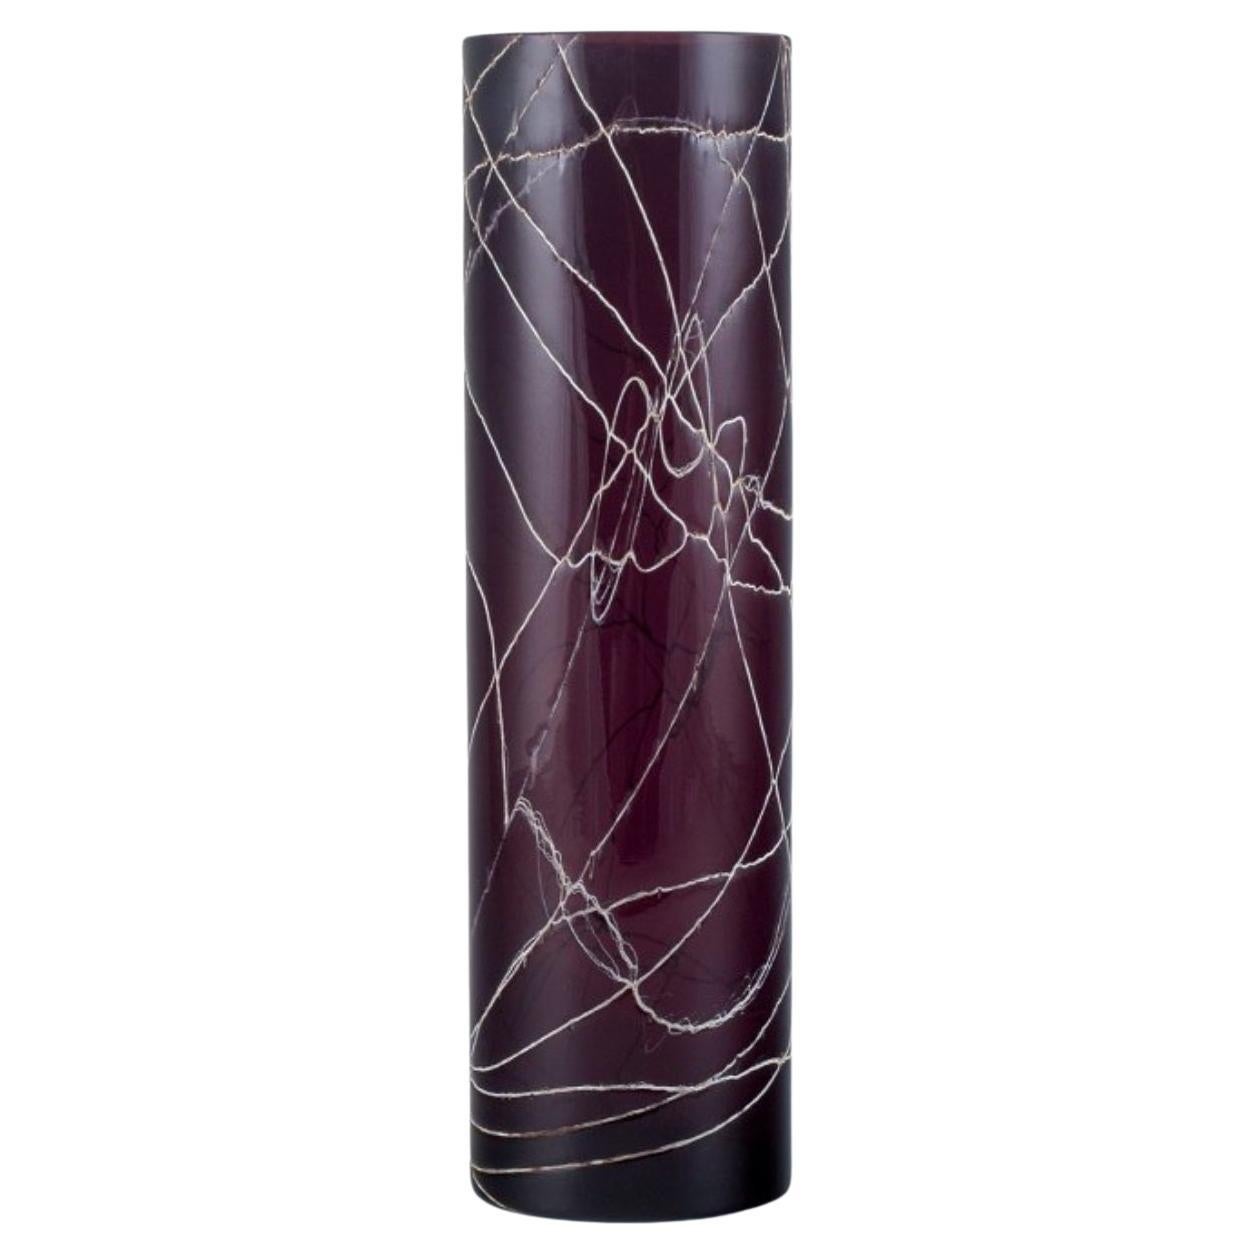 Purple Art Glass Vase Decorated with Silvery Threads, Mid-20th C